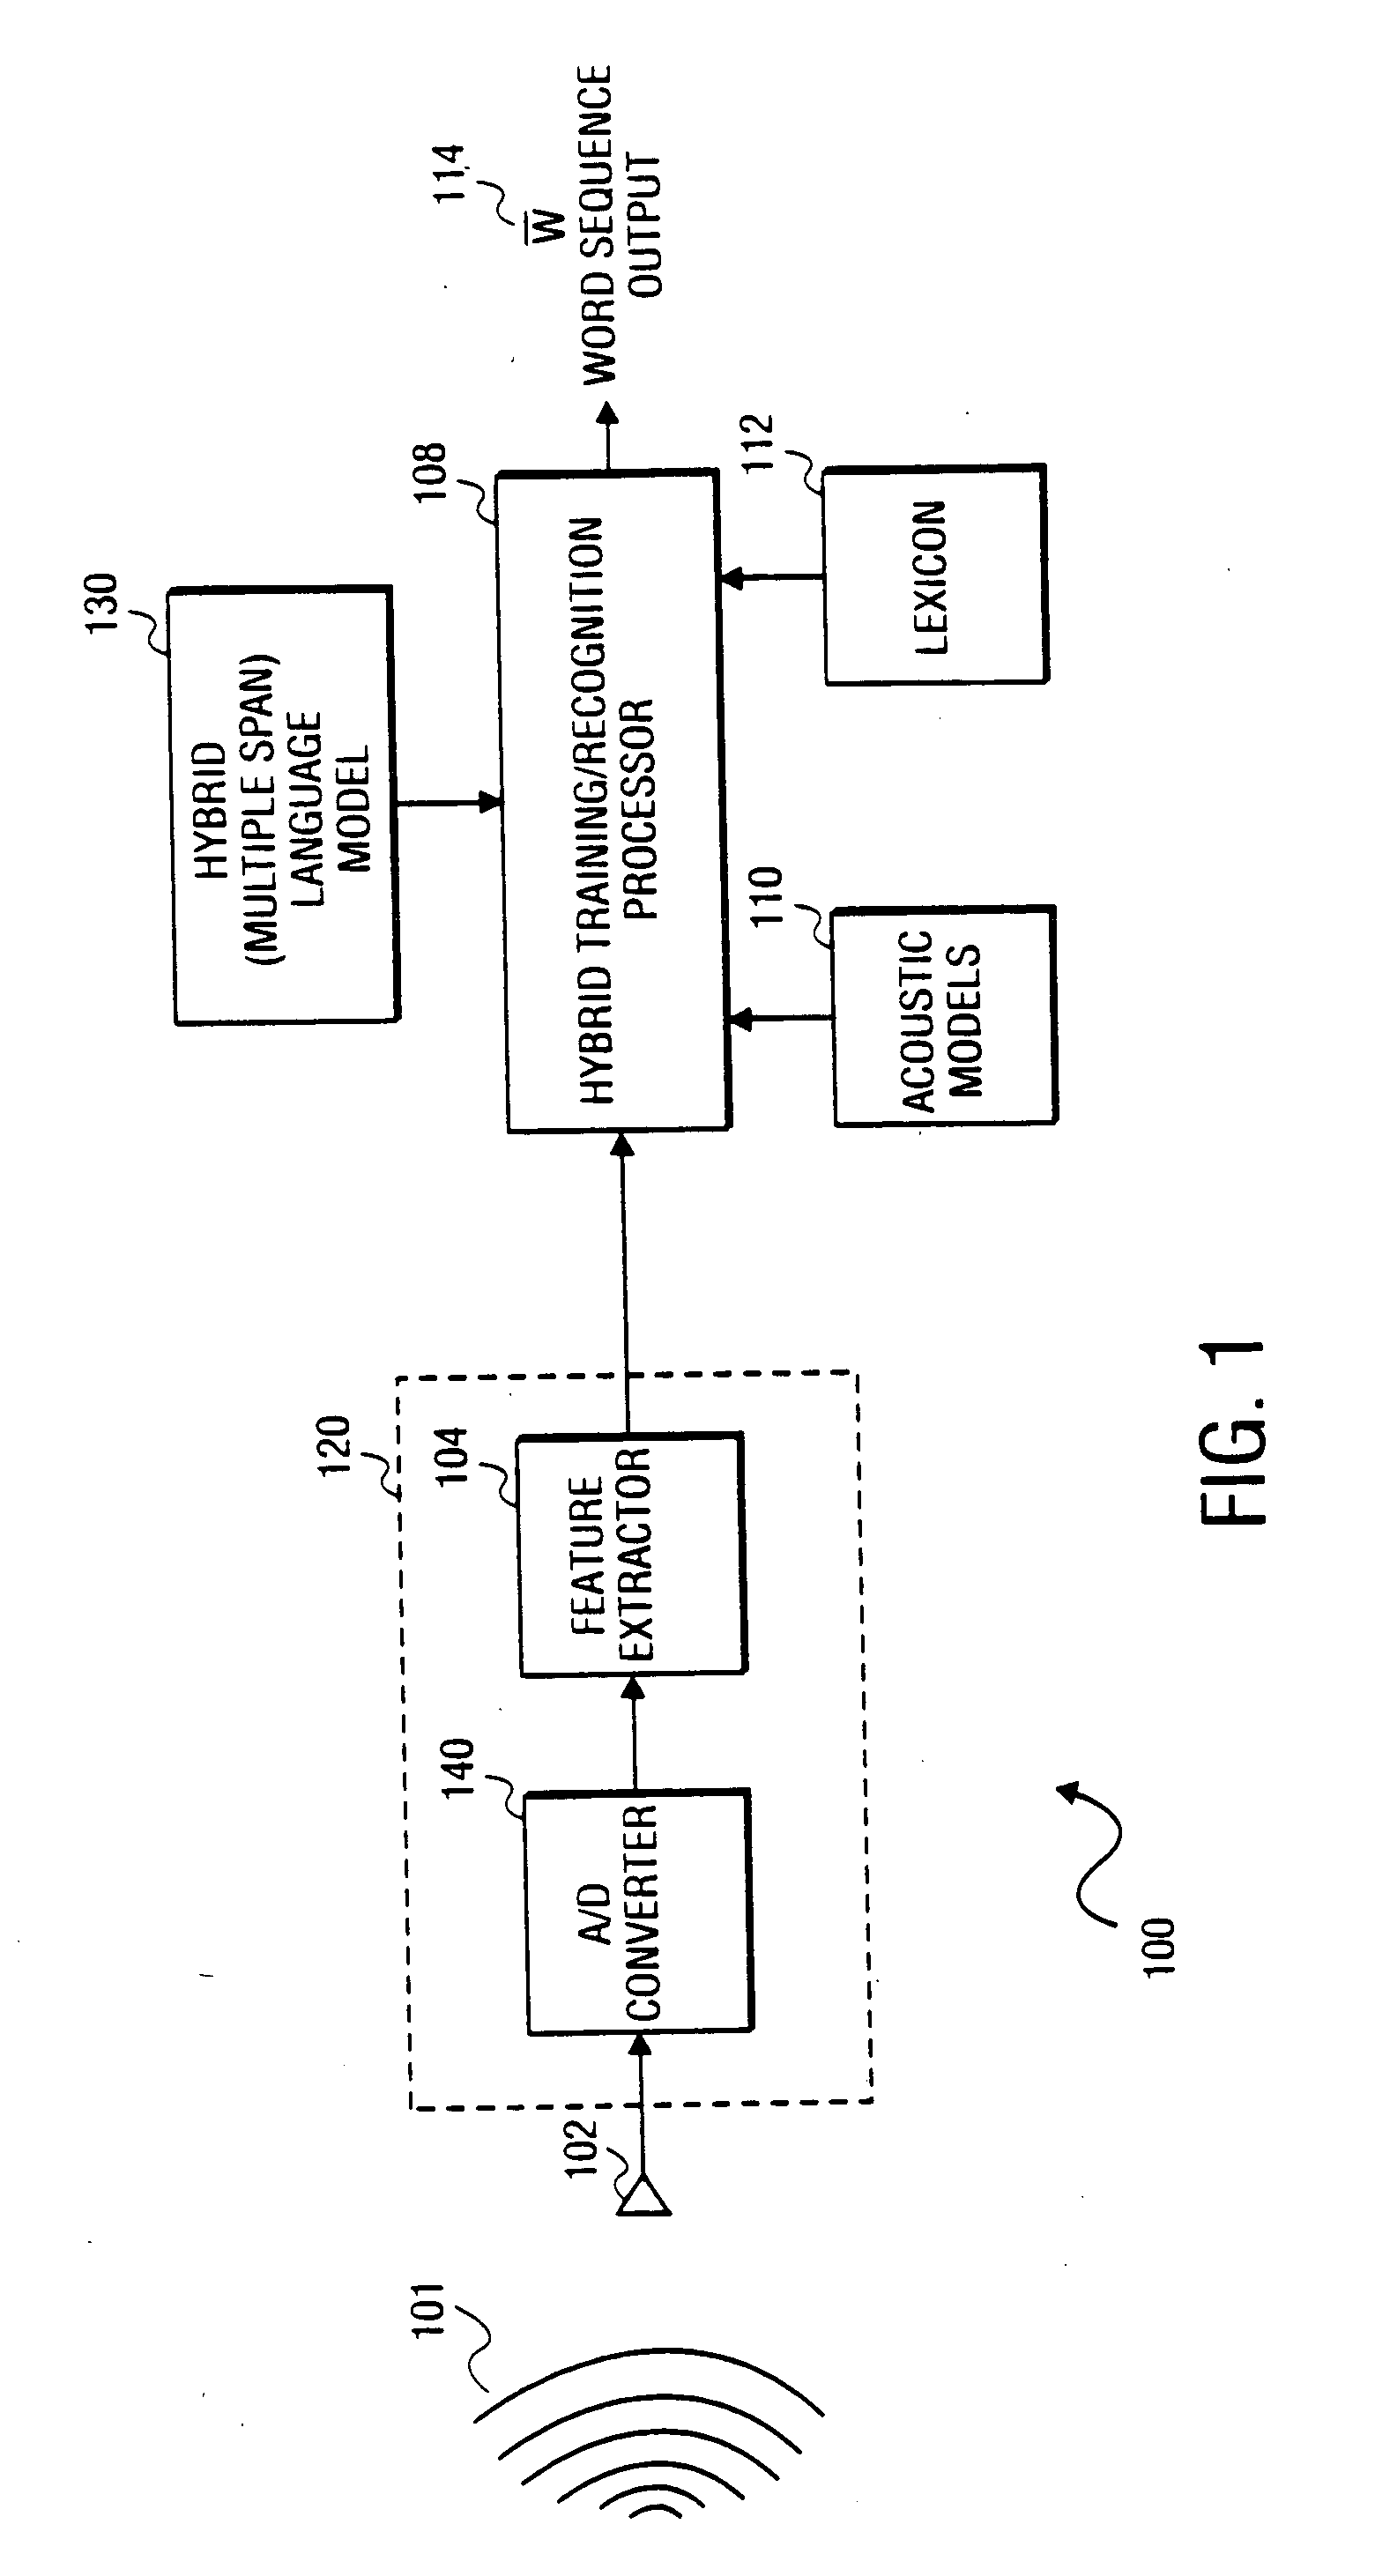 Method for dynamic context scope selection in hybrid N-gramlanguage modeling